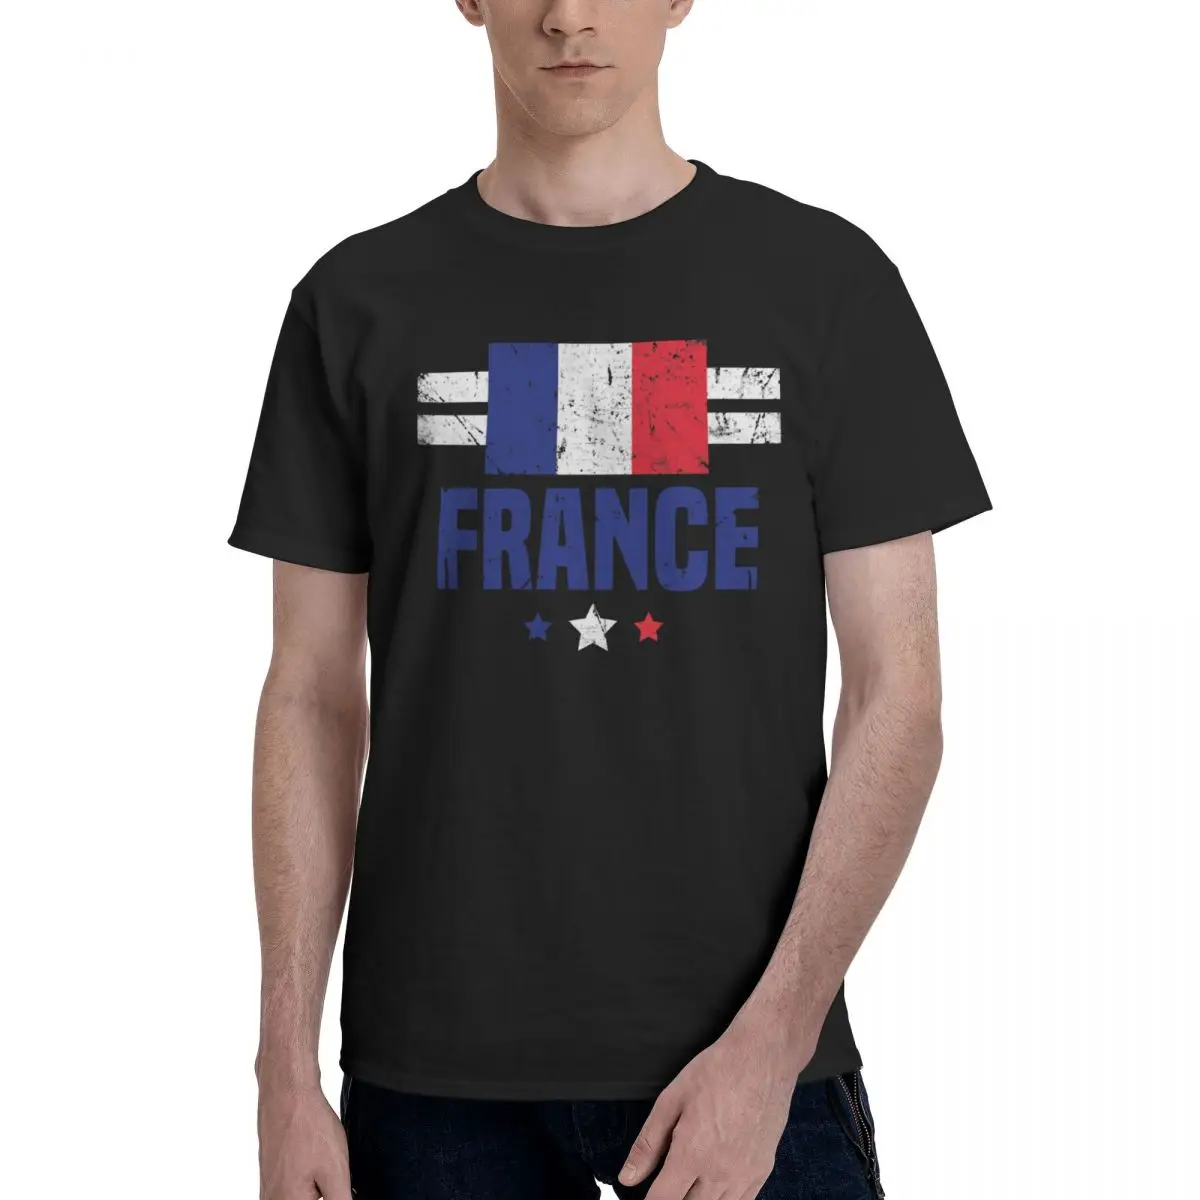 

France Flag French Apparel Essential Move Champion Graphic Cool Tshirt High grade Fitness Eur Size